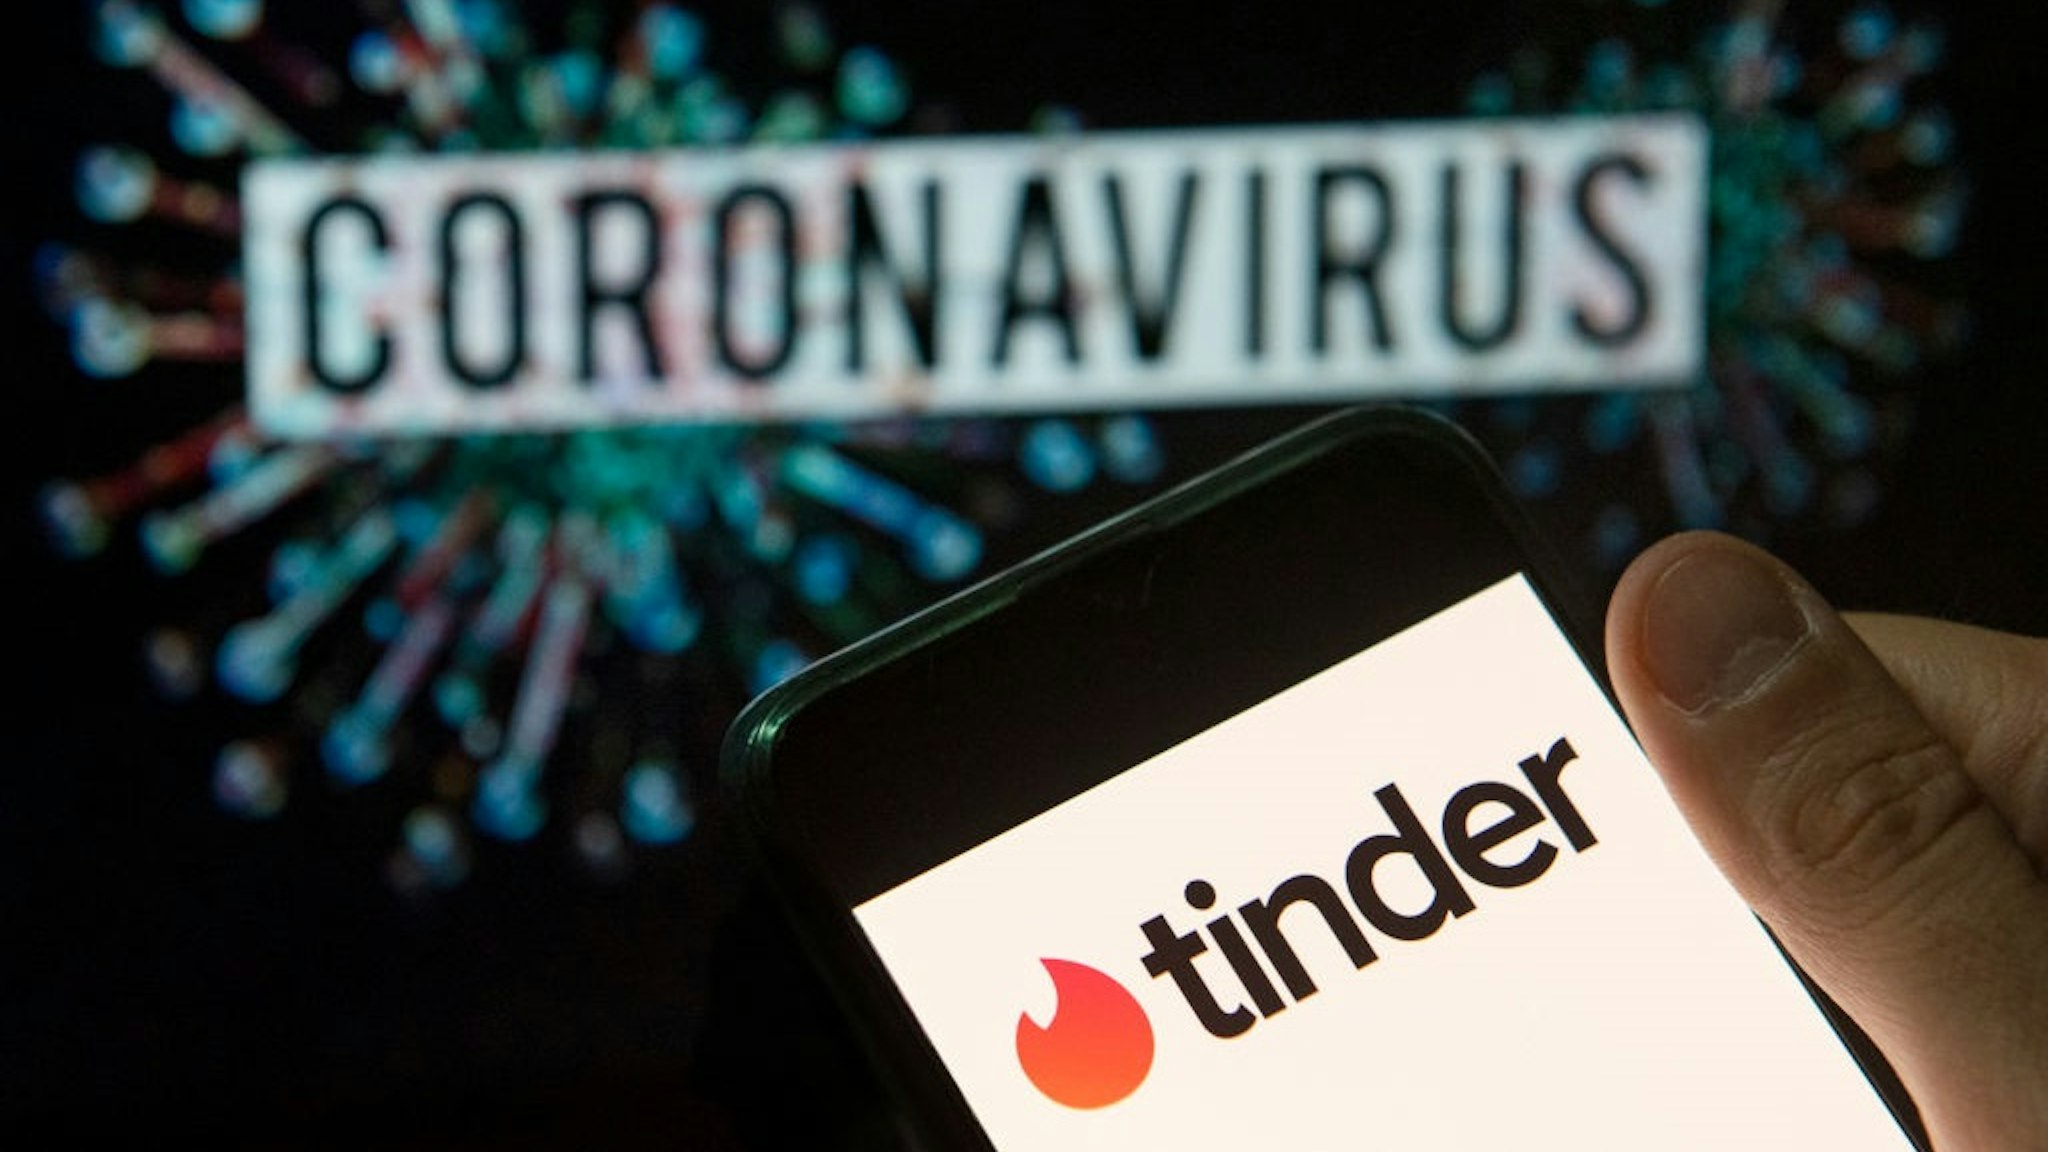 CHINA - 2020/03/22: In this photo illustration the mobile dating app Tinder logo seen displayed on a smartphone with a computer model of the COVID-19 coronavirus on the background.